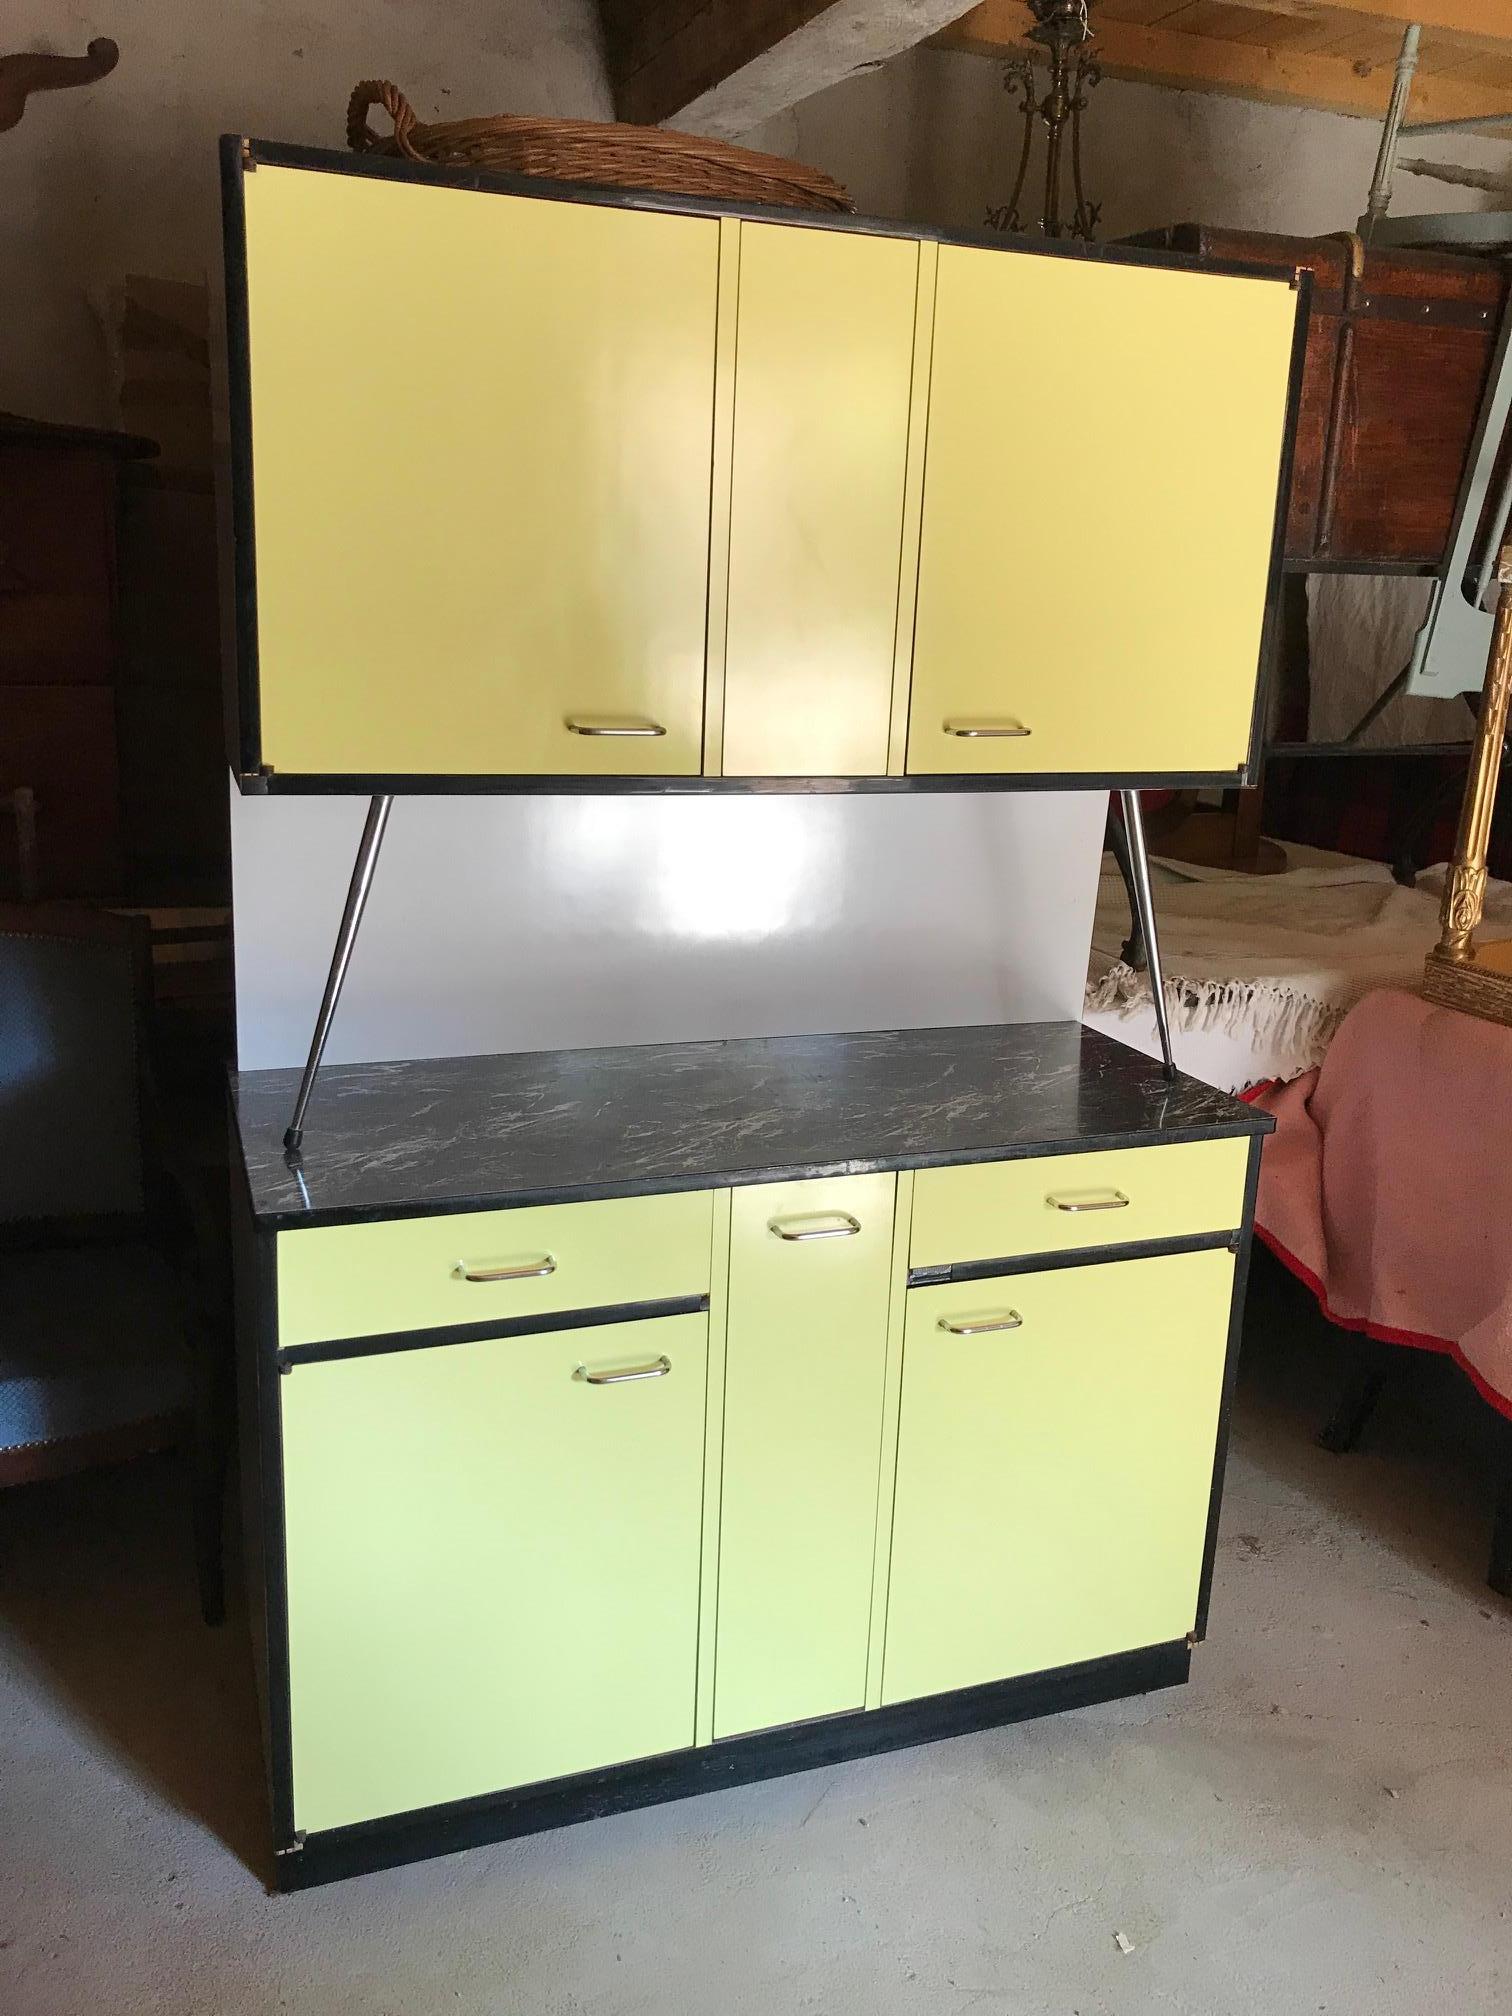 Very nice 20th century French yellow and black formica kitchen buffet from the 1970s.
Two parts attached at the back. The top is made with a black imitation marble.
Lot of drawers. In the middle the is a bread drawer. Very good condition.
True